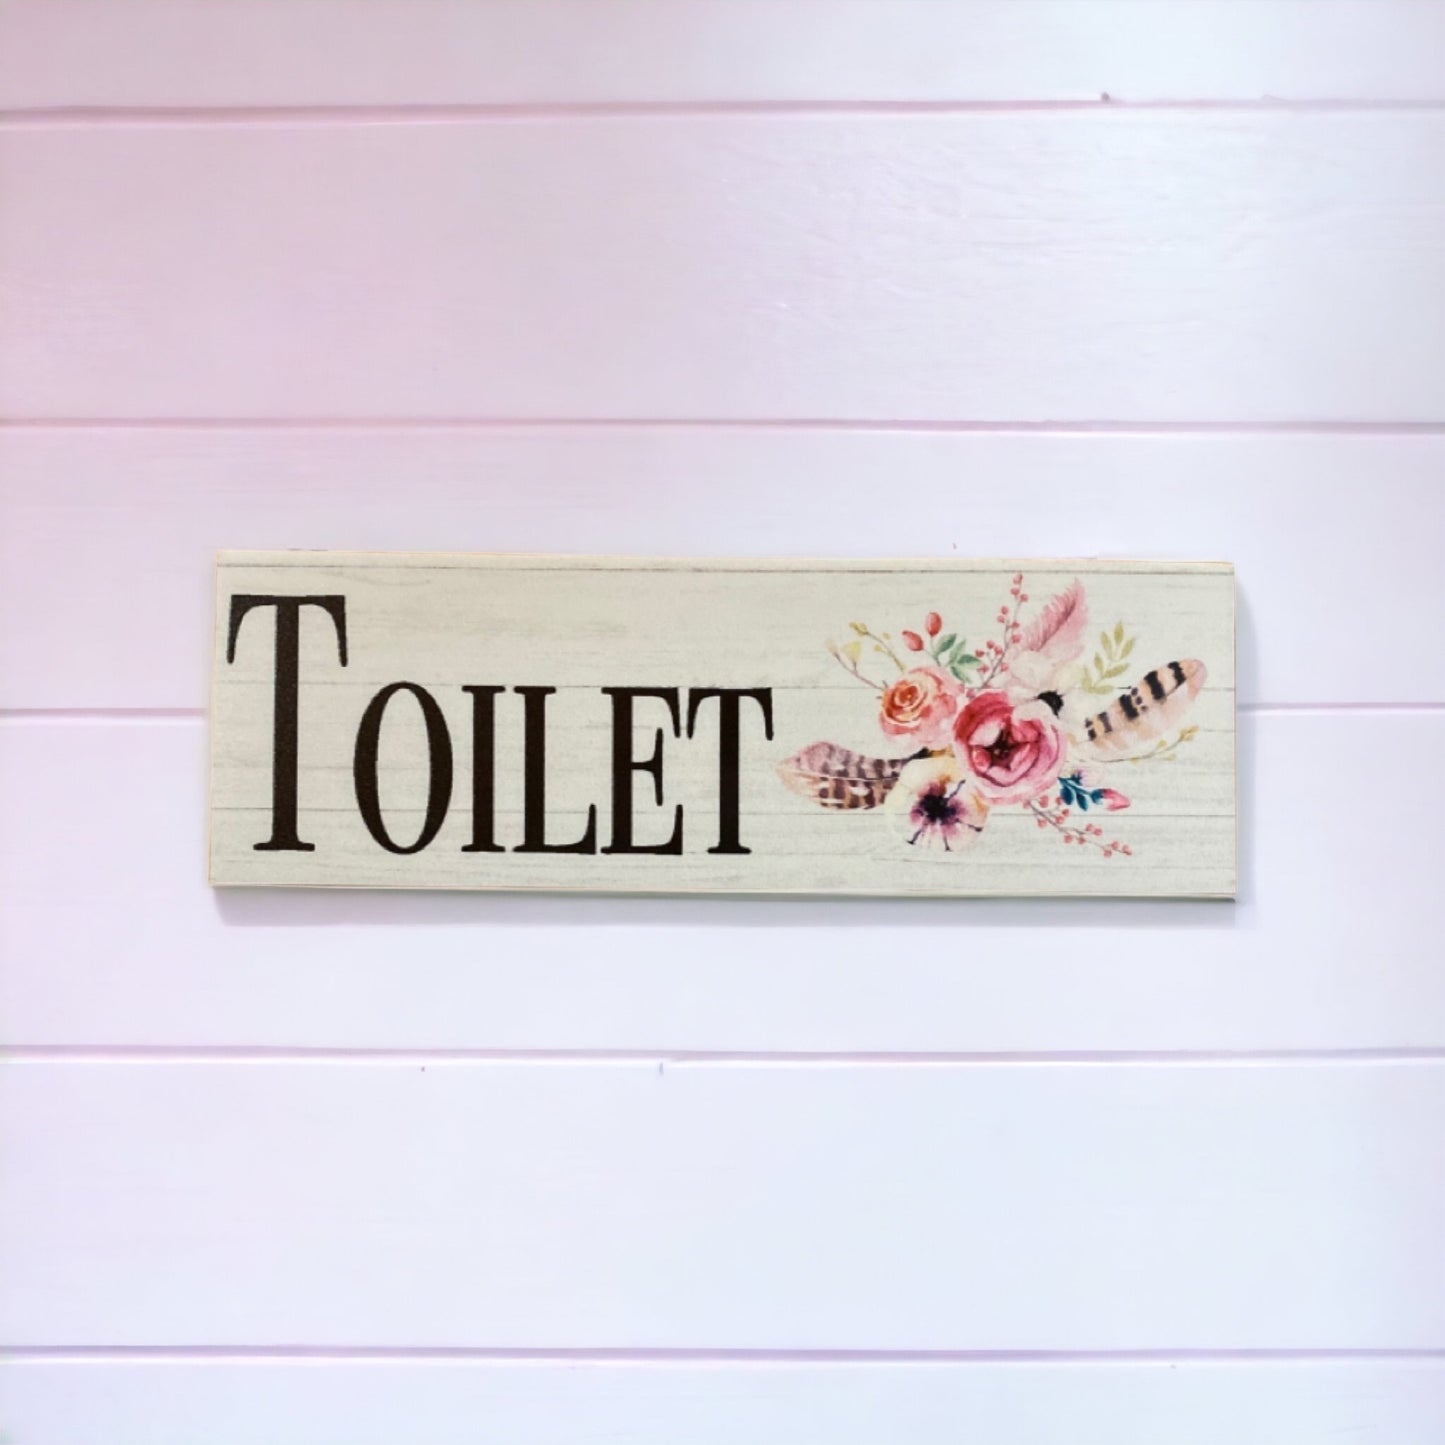 Flowers Feathers Toilet Laundry Bathroom Door Sign - The Renmy Store Homewares & Gifts 